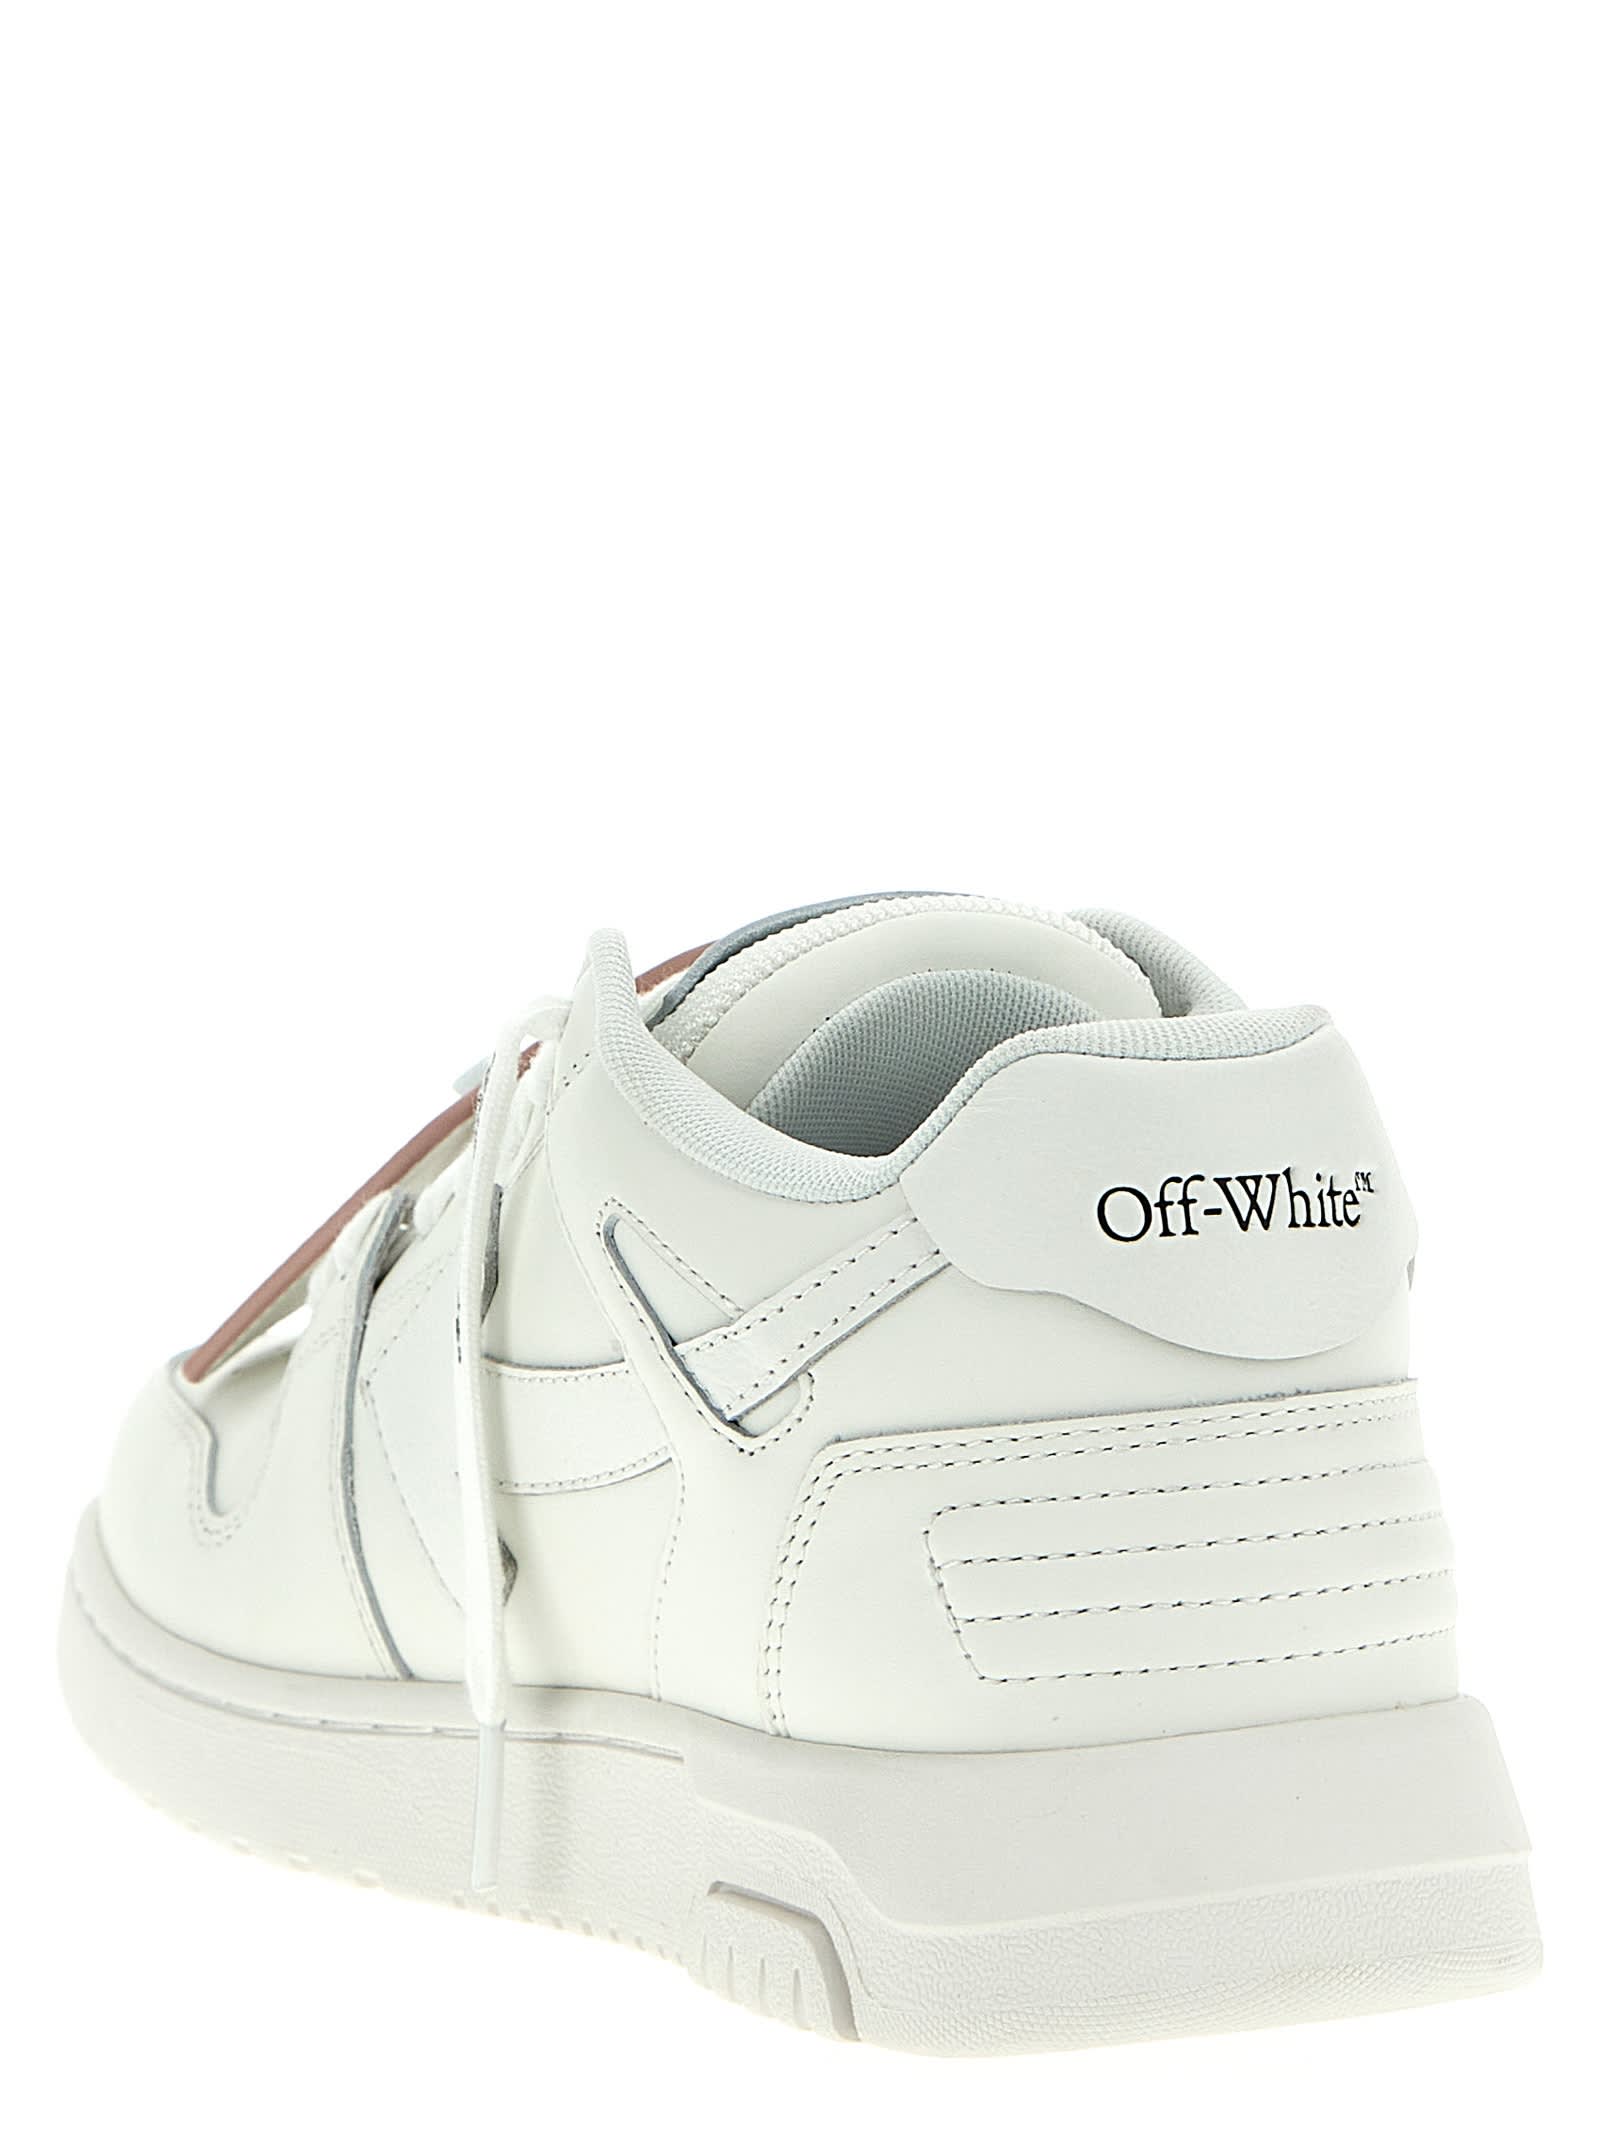 For Walking sneakers in white